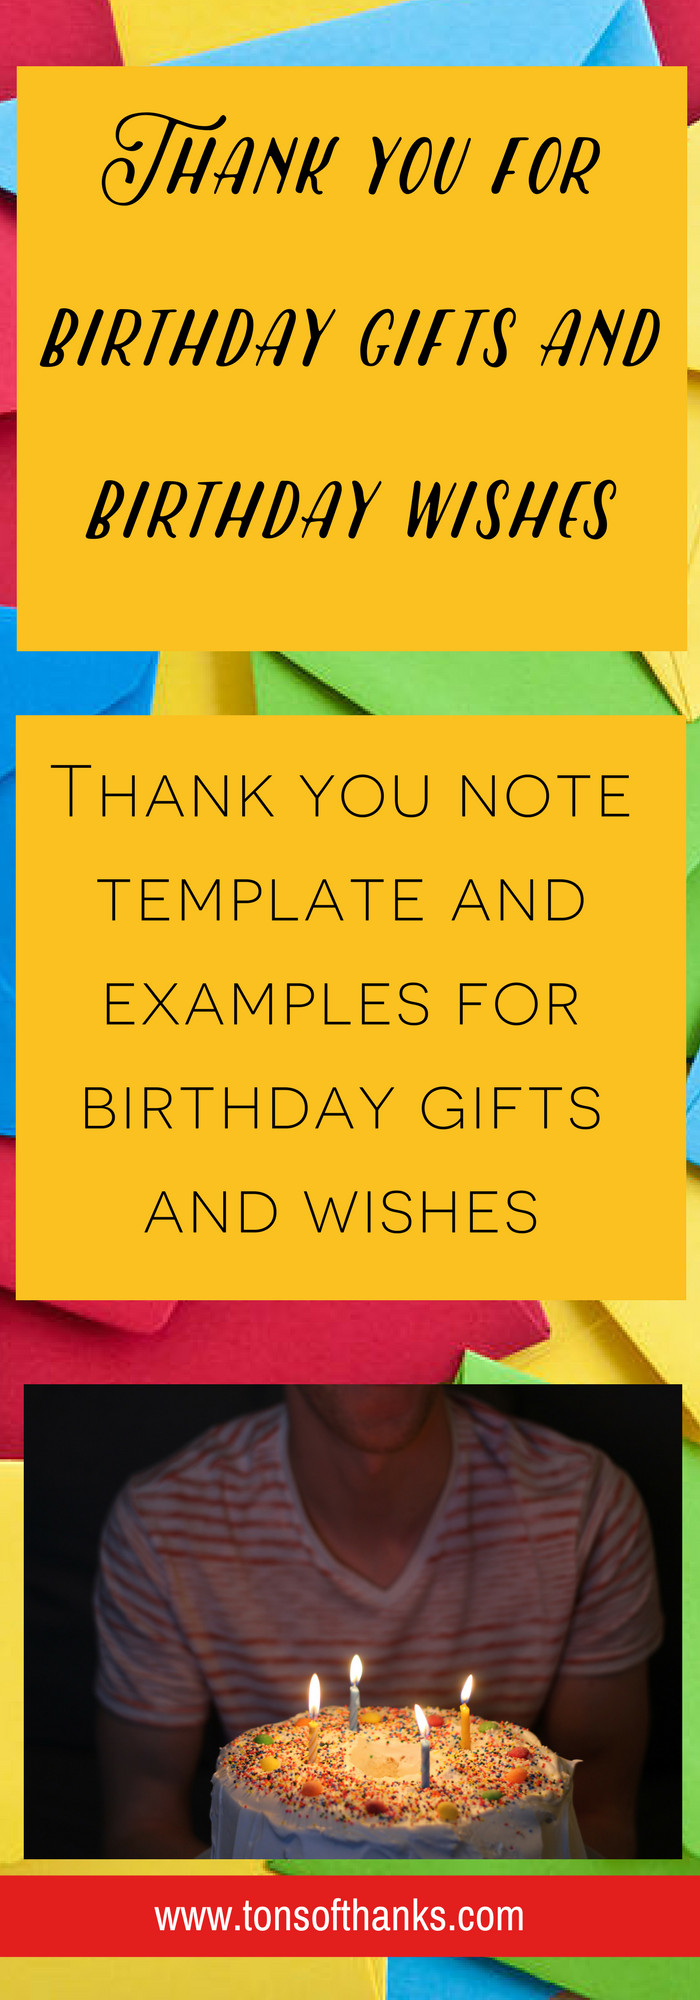 Birthday Wishes Thank You Note
 27 Thank you for birthday ts and wishes examples